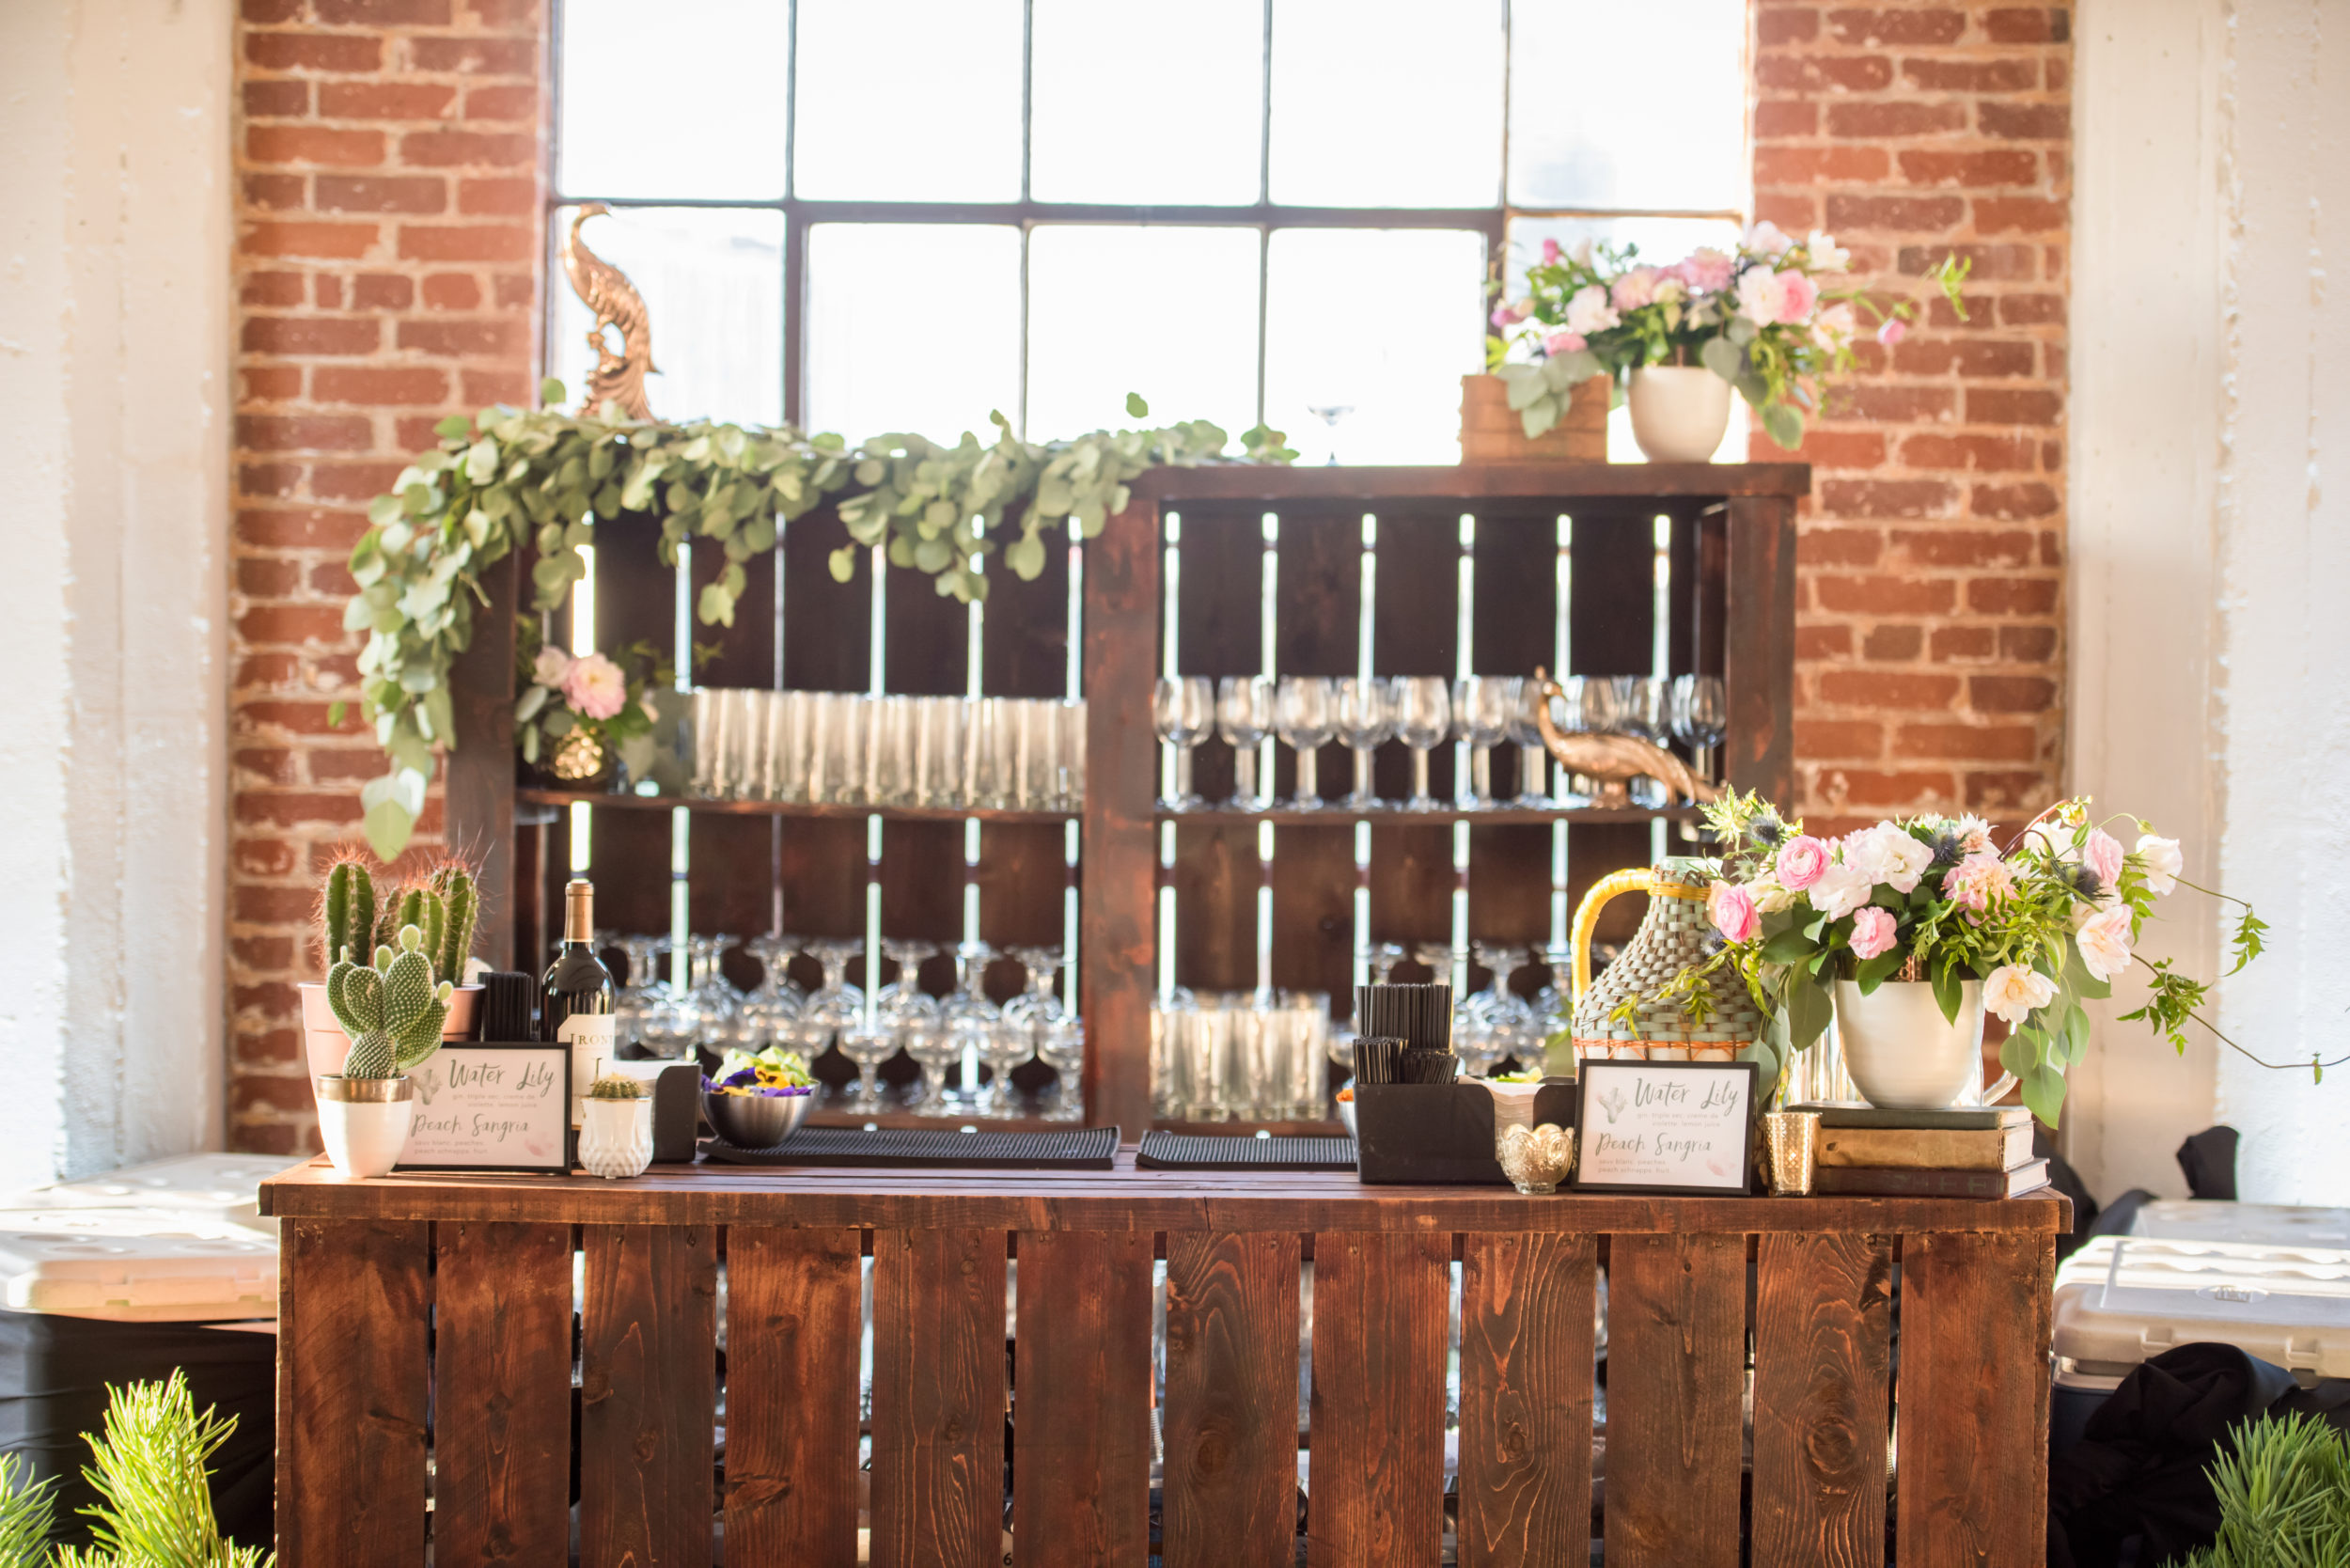 Wedding Bar Station at the Hudson Loft | The Knot Event